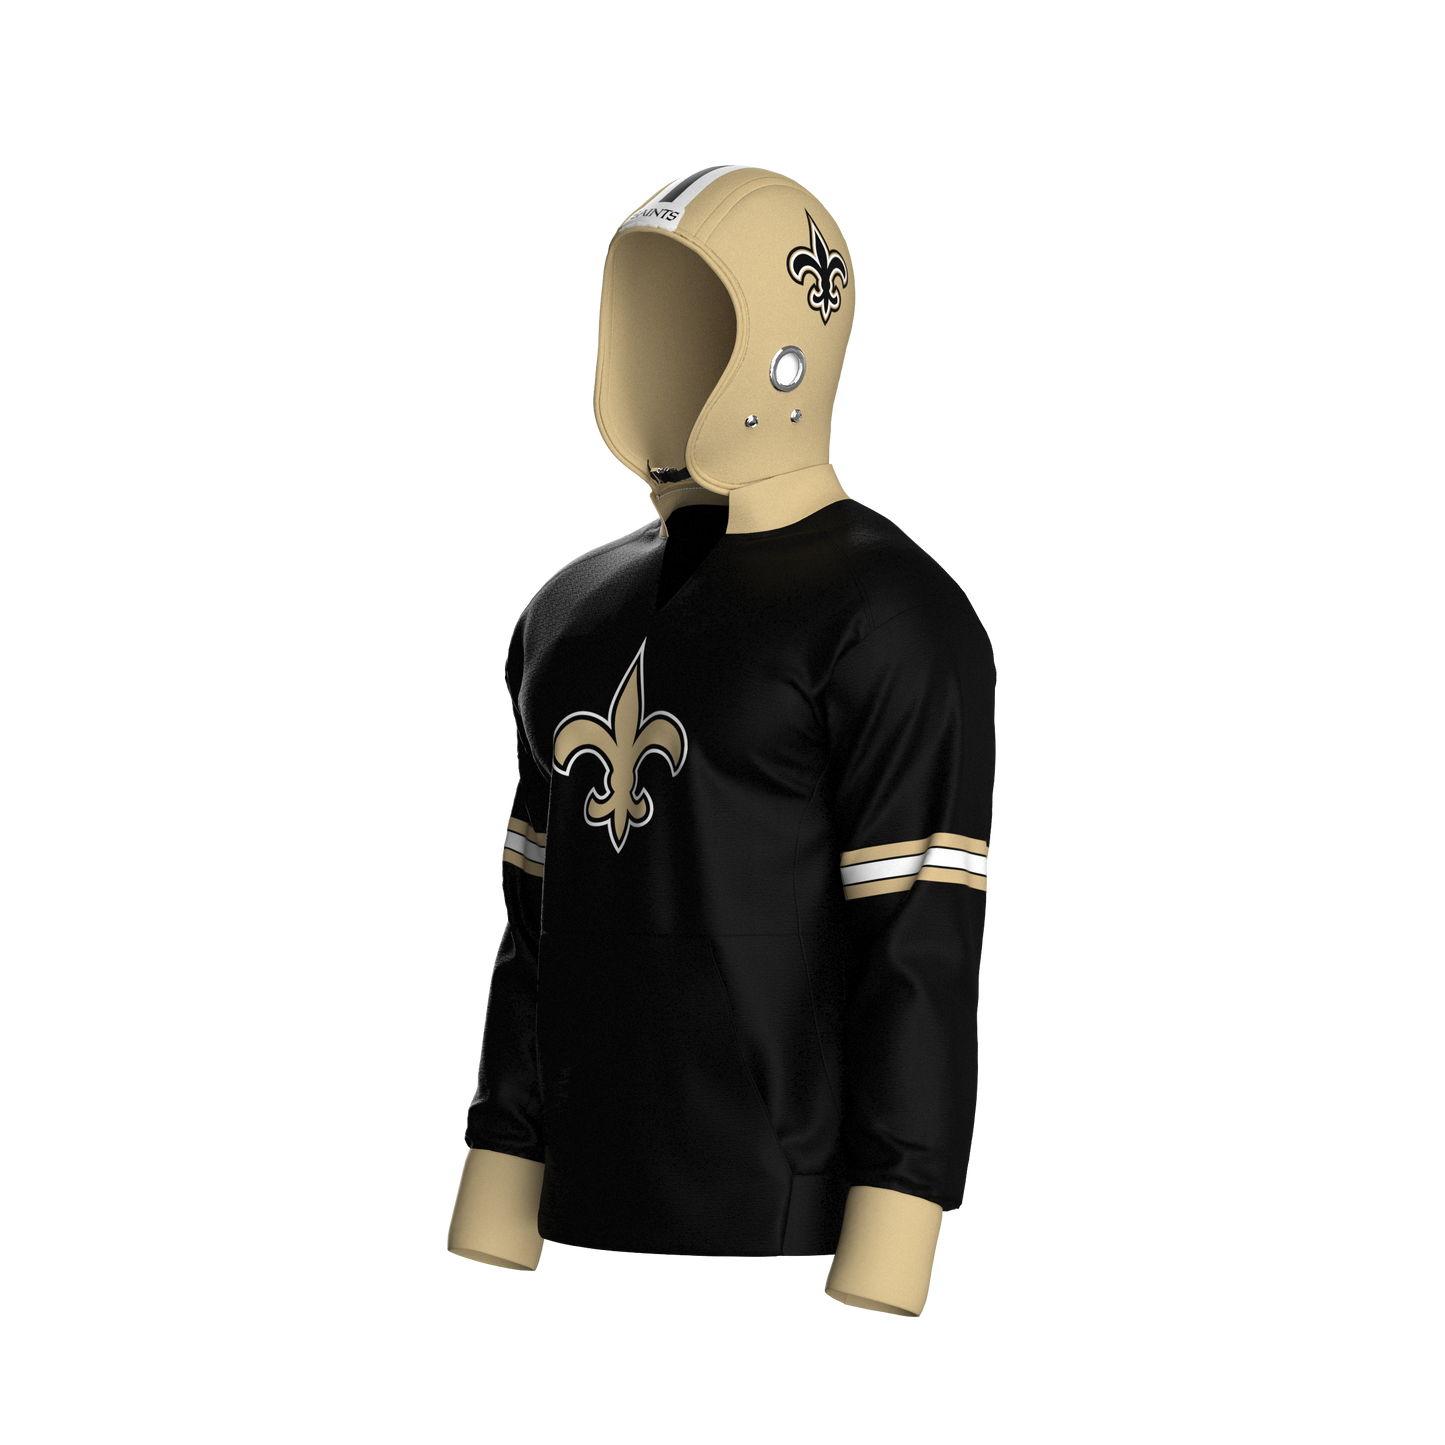 New Orleans Saints Home Pullover (youth)